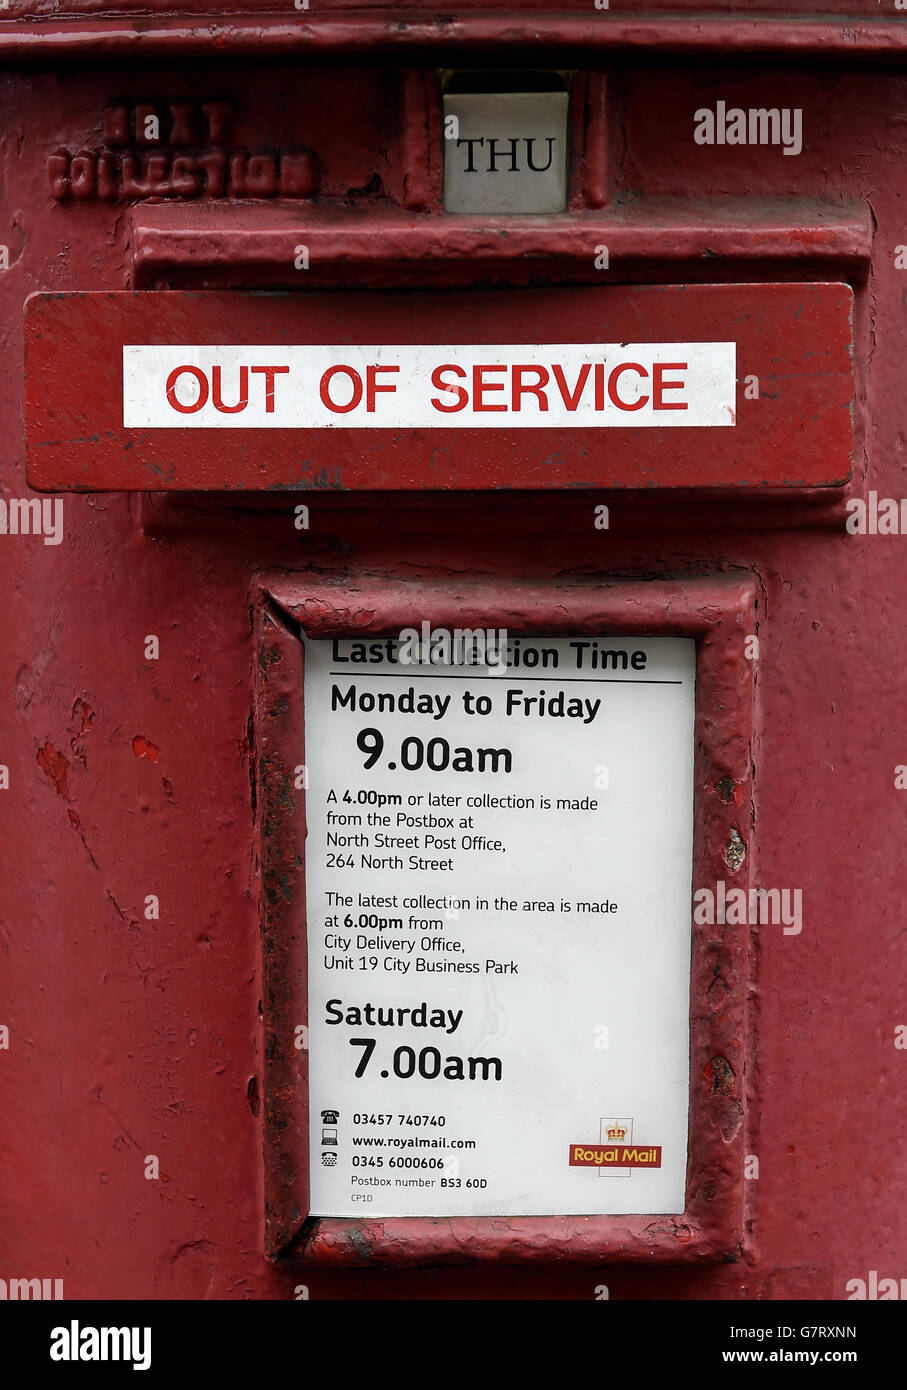 General view of a Royal mail Postbox with a sign saying 'Out of Service' in the letter slot Stock Photo